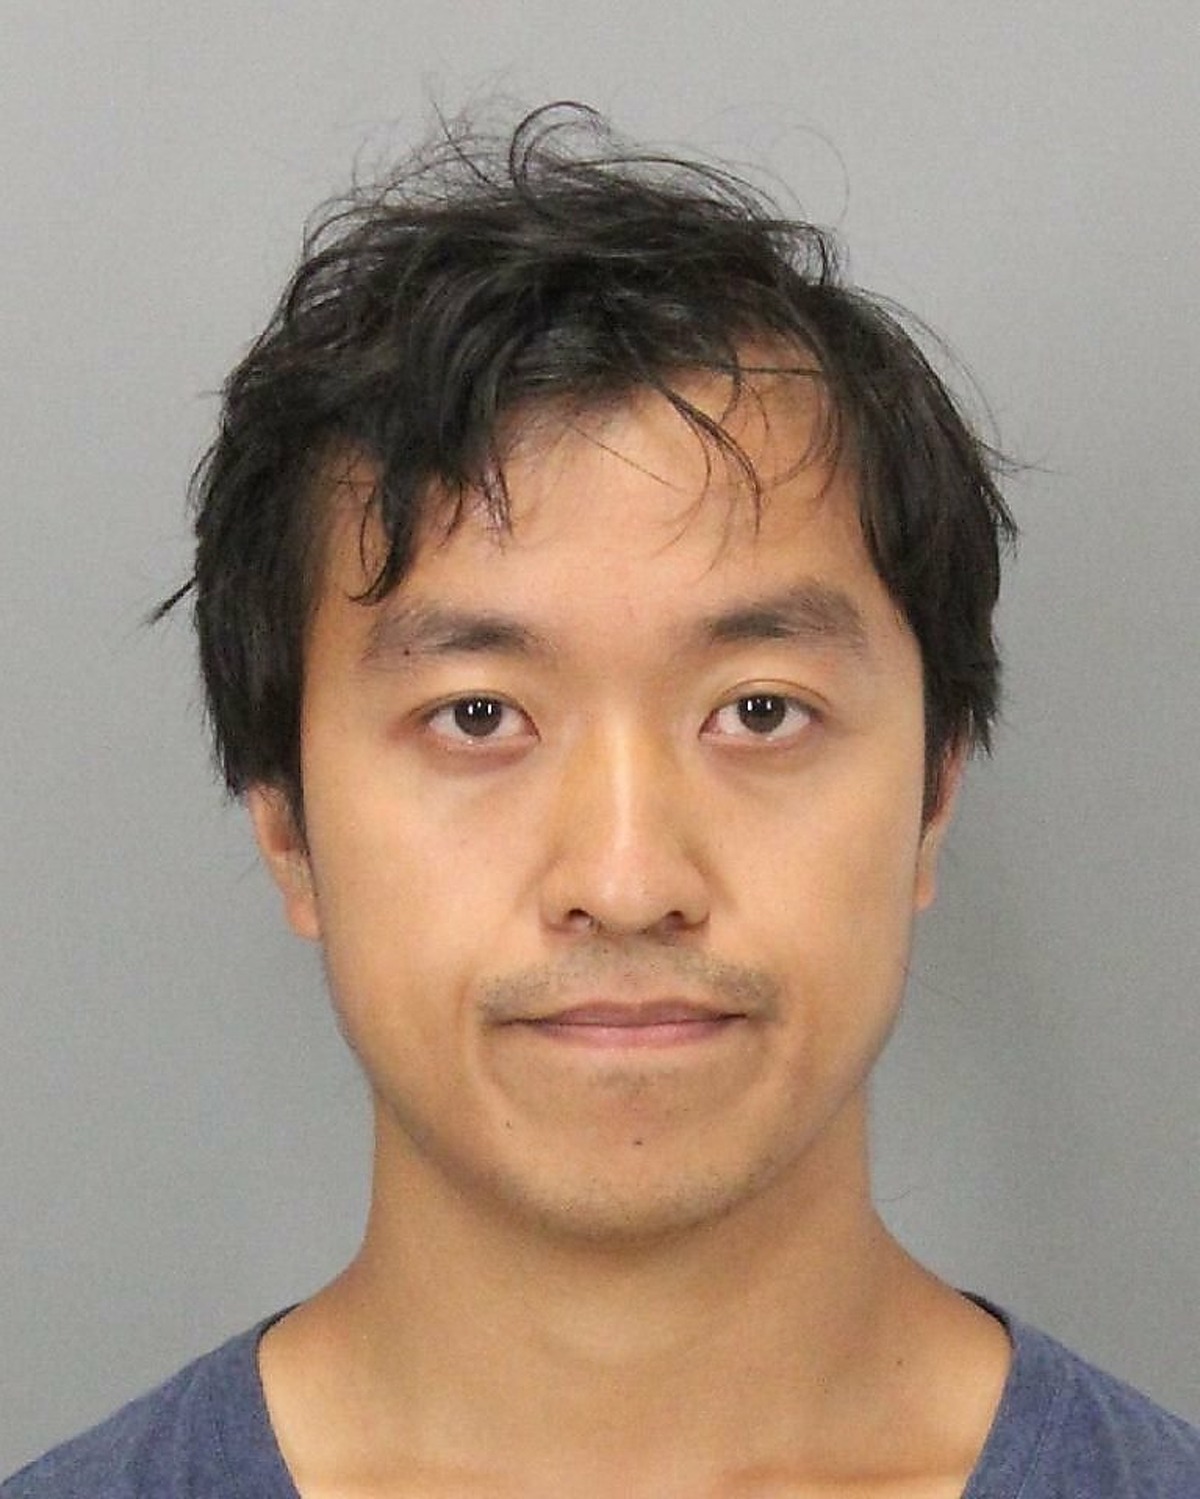 Yue Zhou was arrested by Palo Alto police on July 5, 2016, on suspicion of raping an acquaintance.